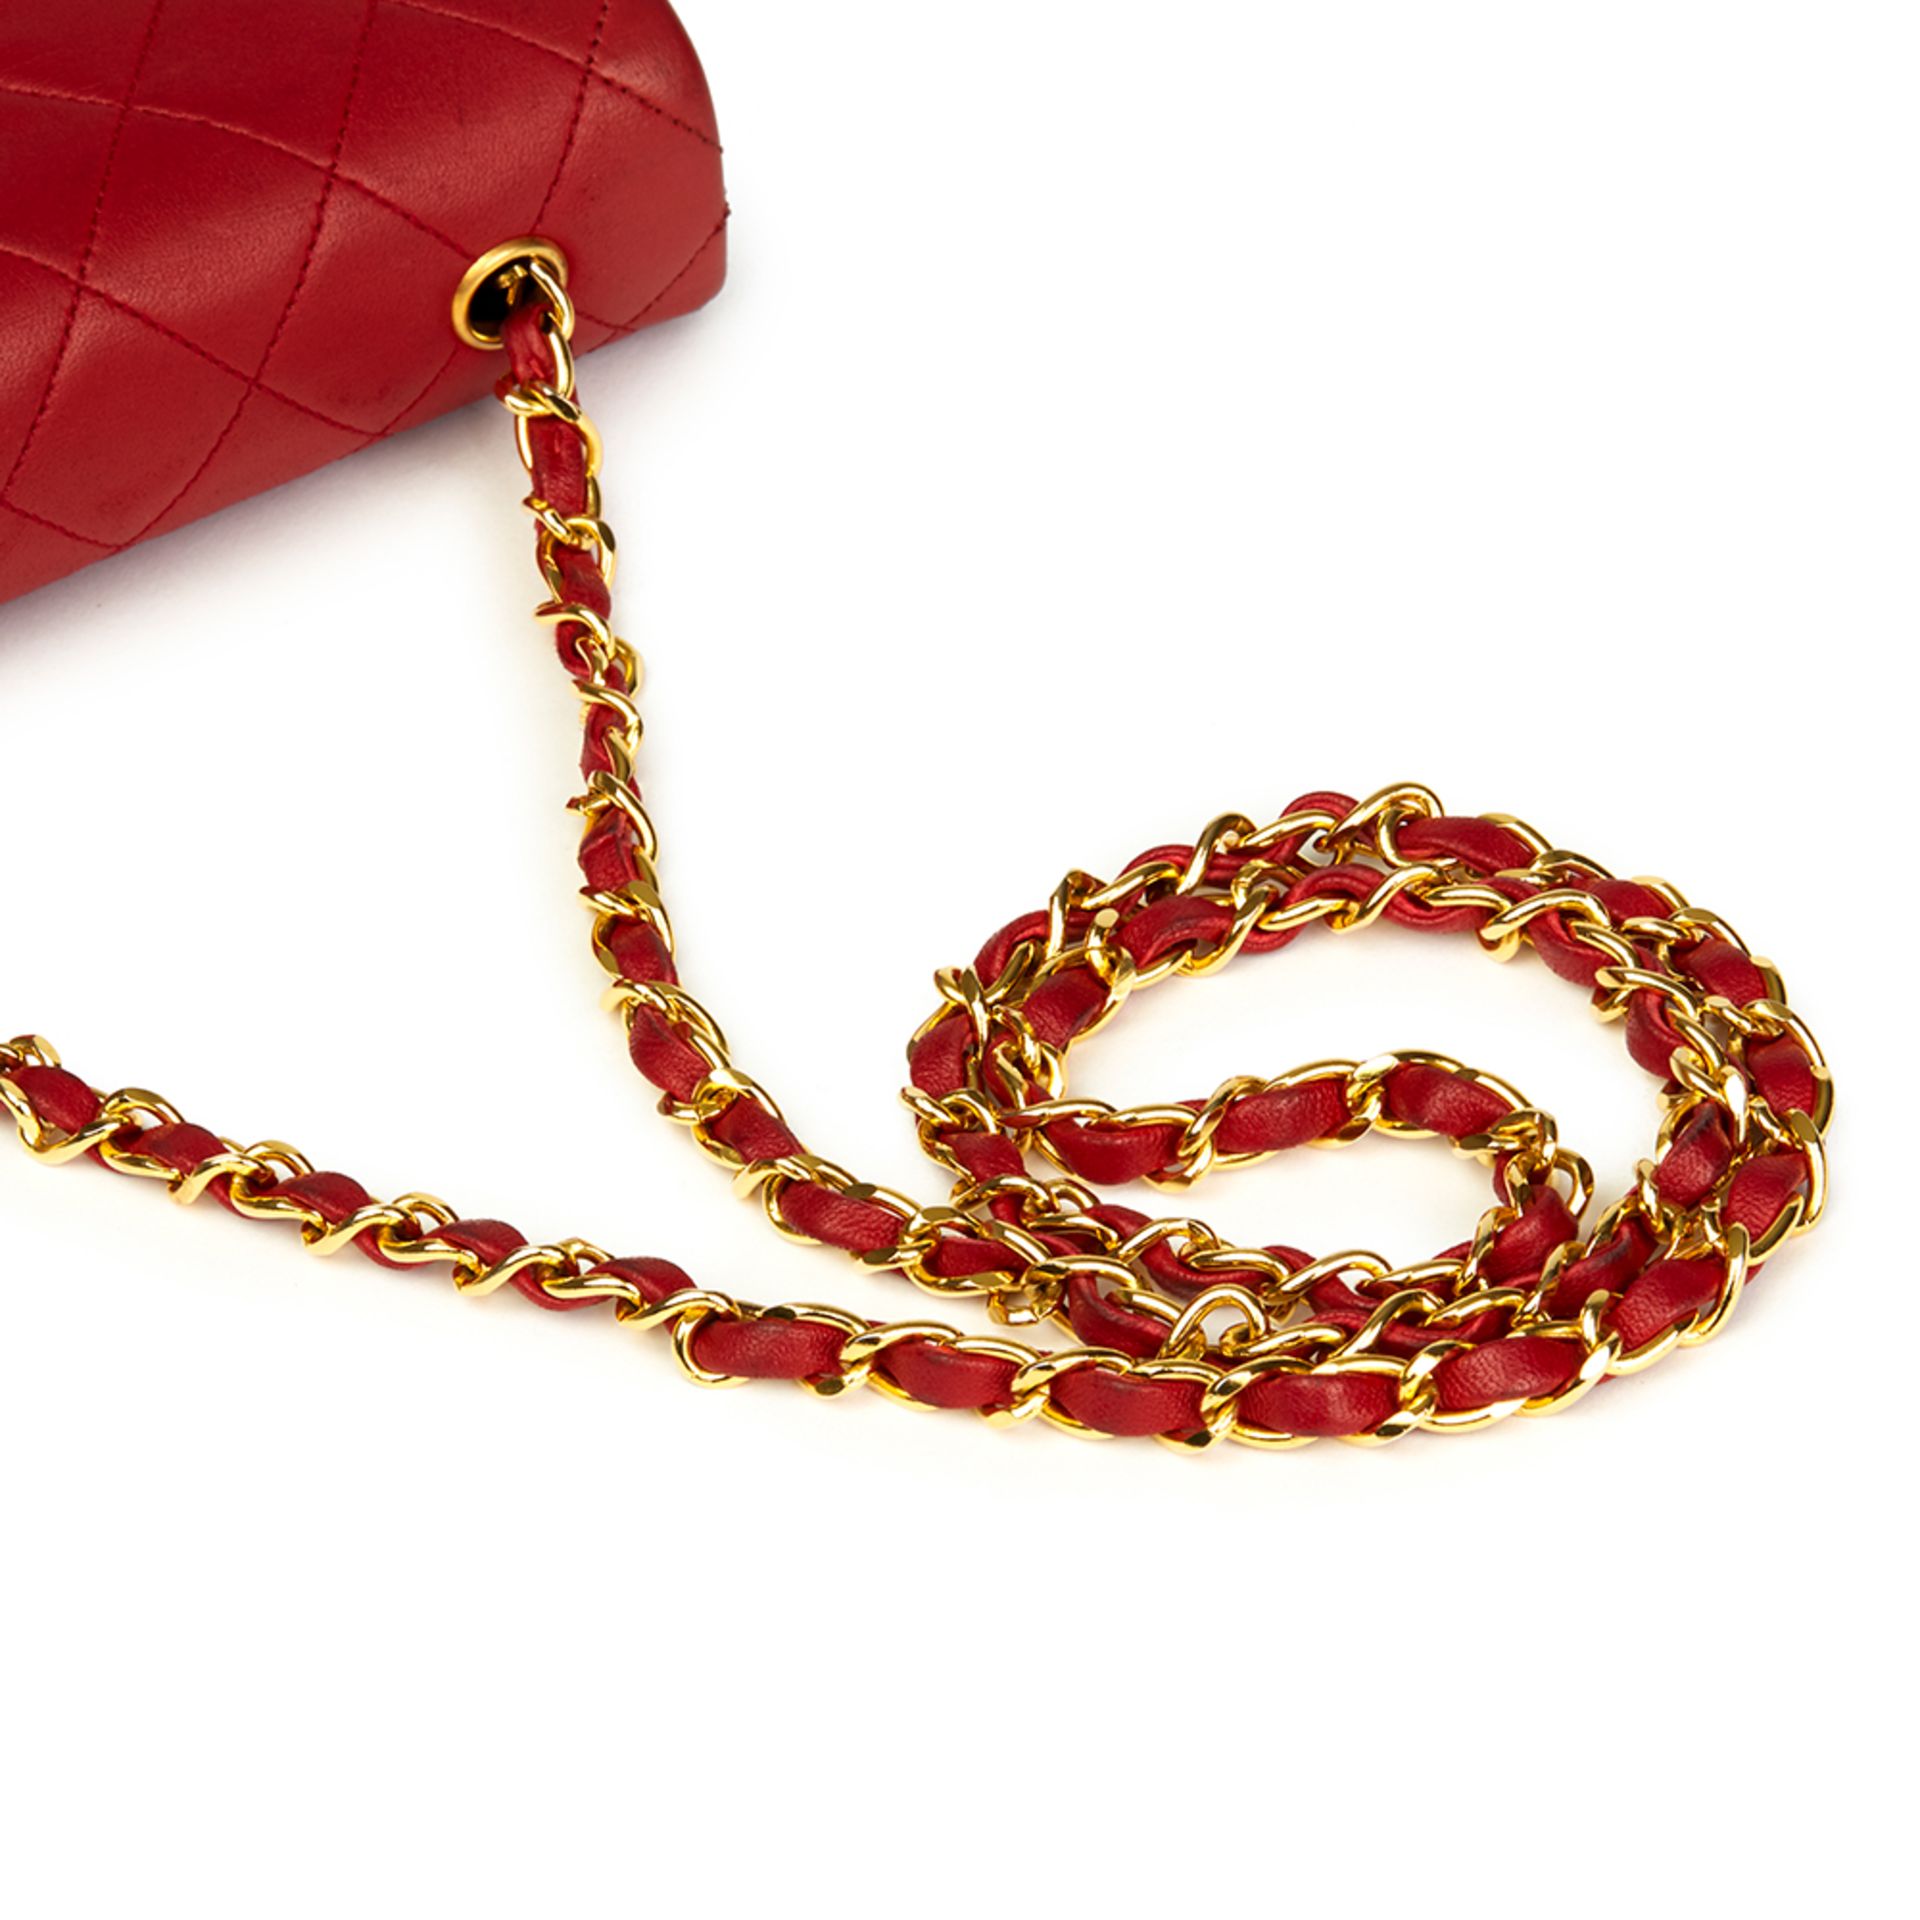 Chanel Red Quilted Lambskin Vintage Mini Flap Bag - Image 7 of 9